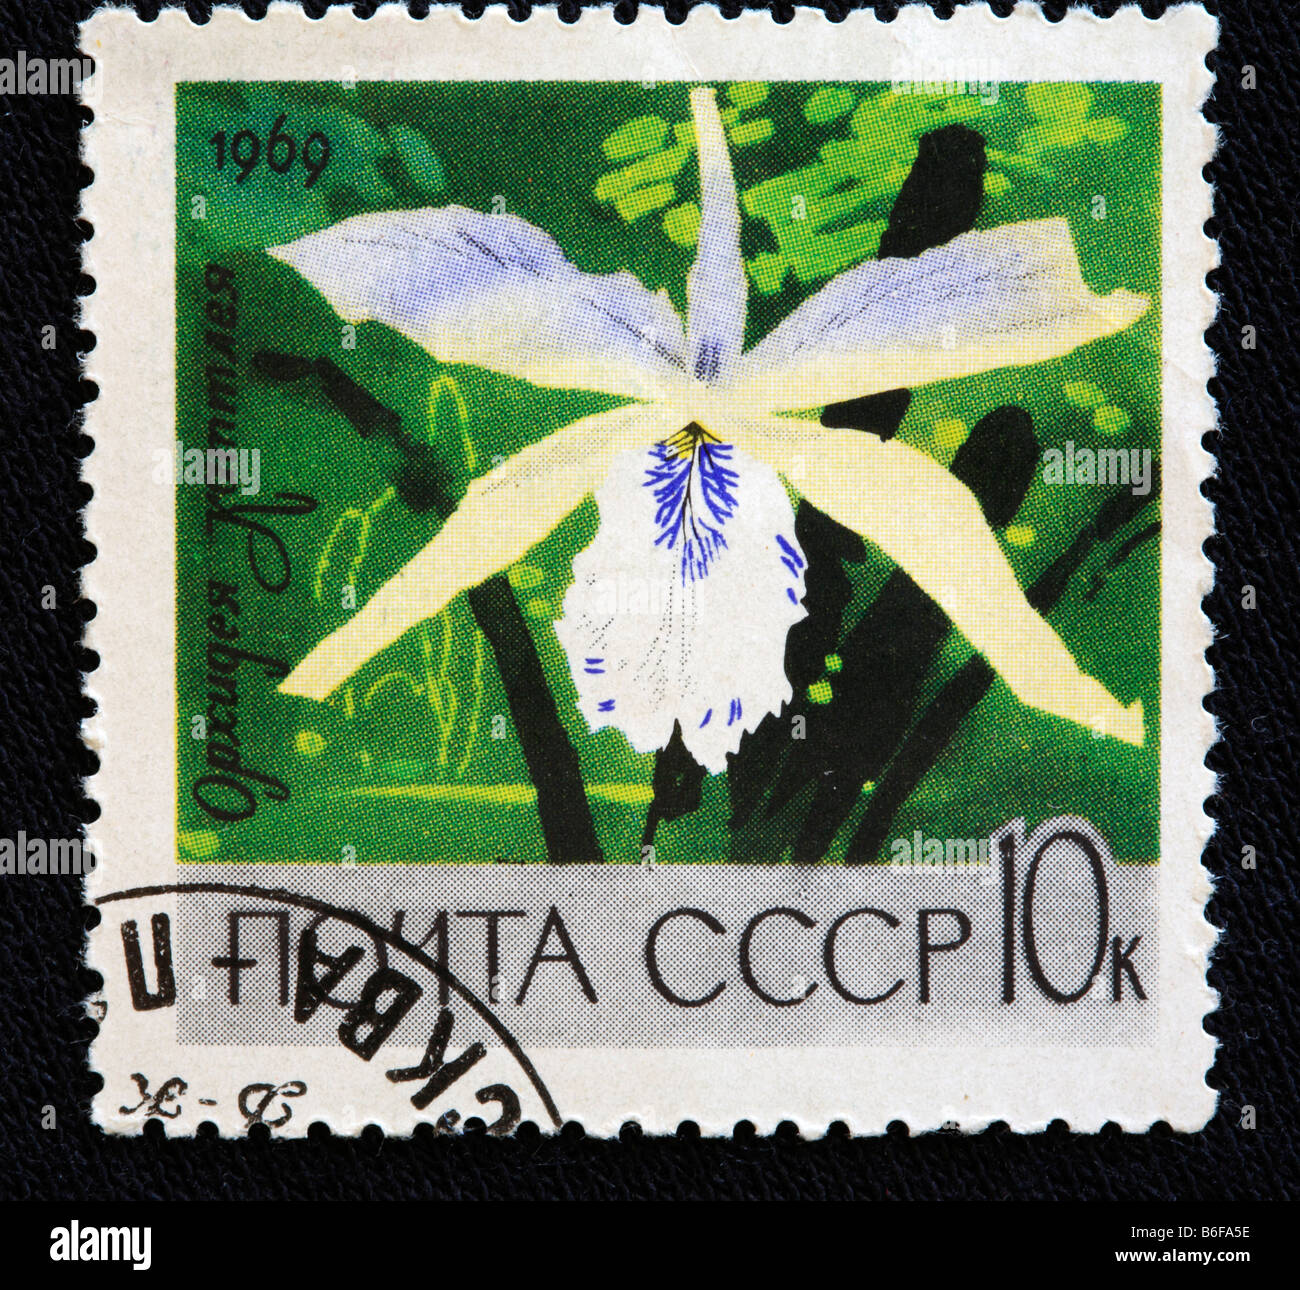 (Orchidée Cattleya speciosissima), timbre-poste, URSS, 1969 Banque D'Images